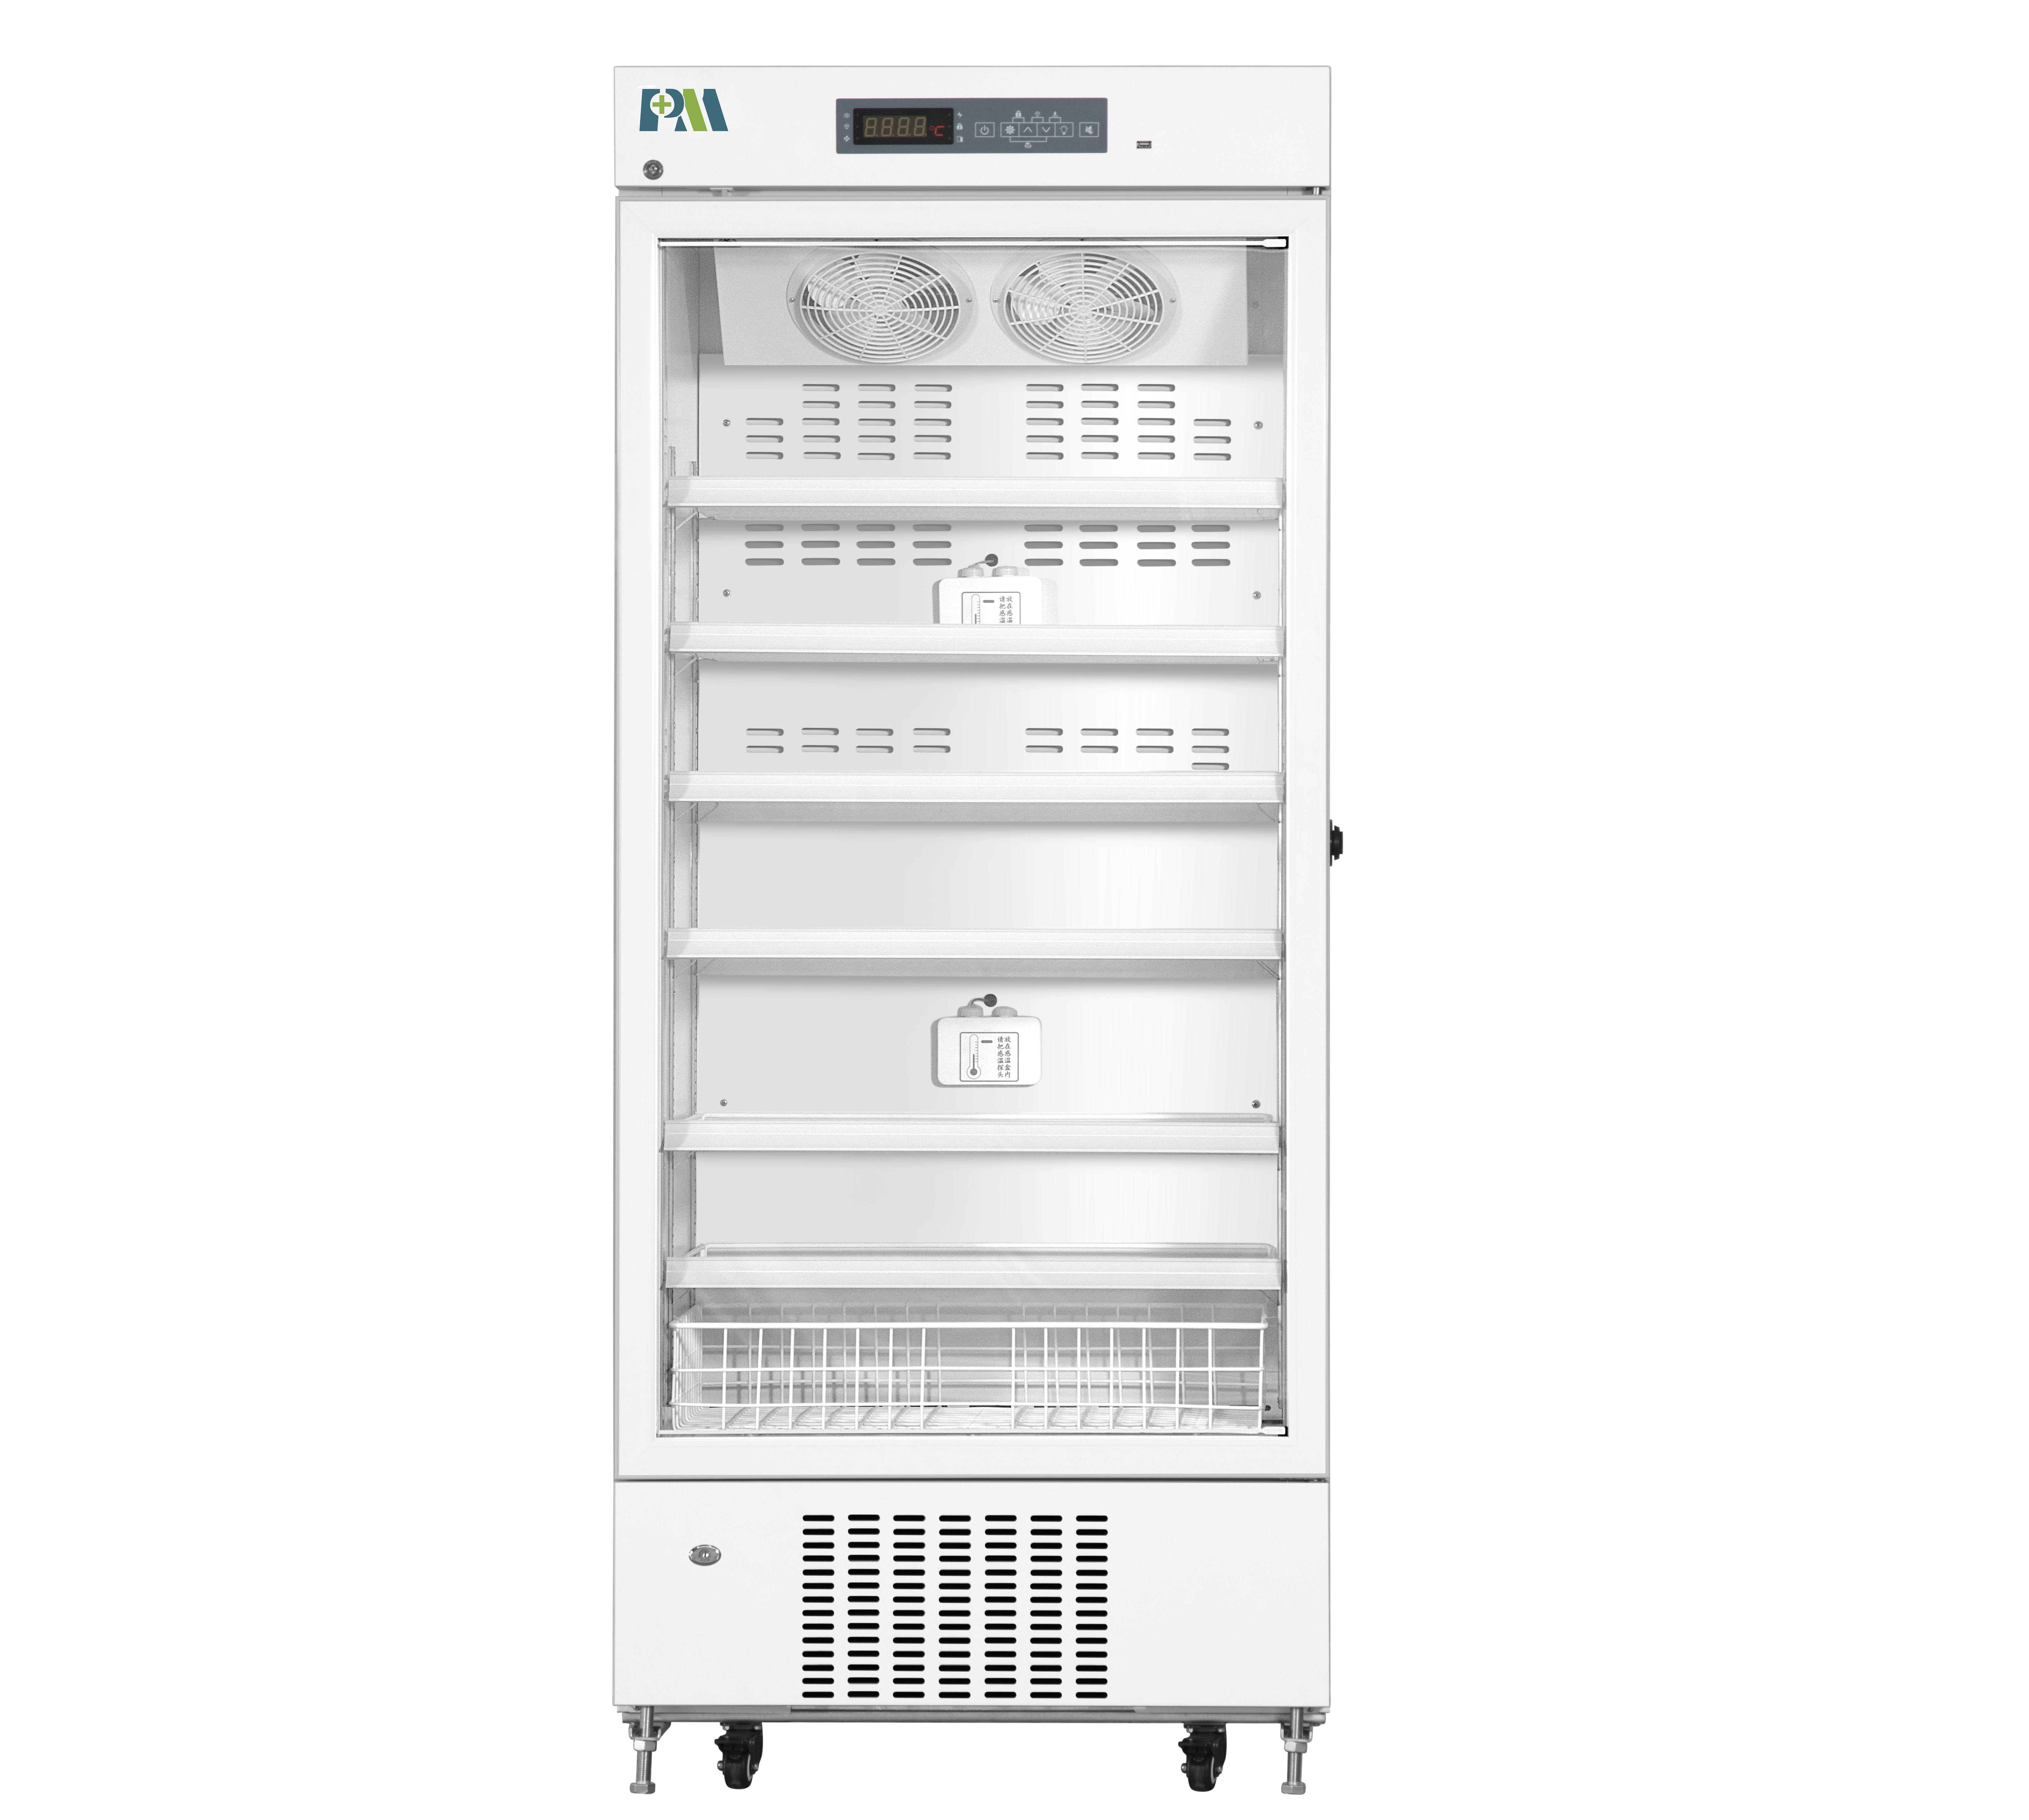 416L Pharmacy Medical Refrigerator 2 - 8 Degree For Vaccines